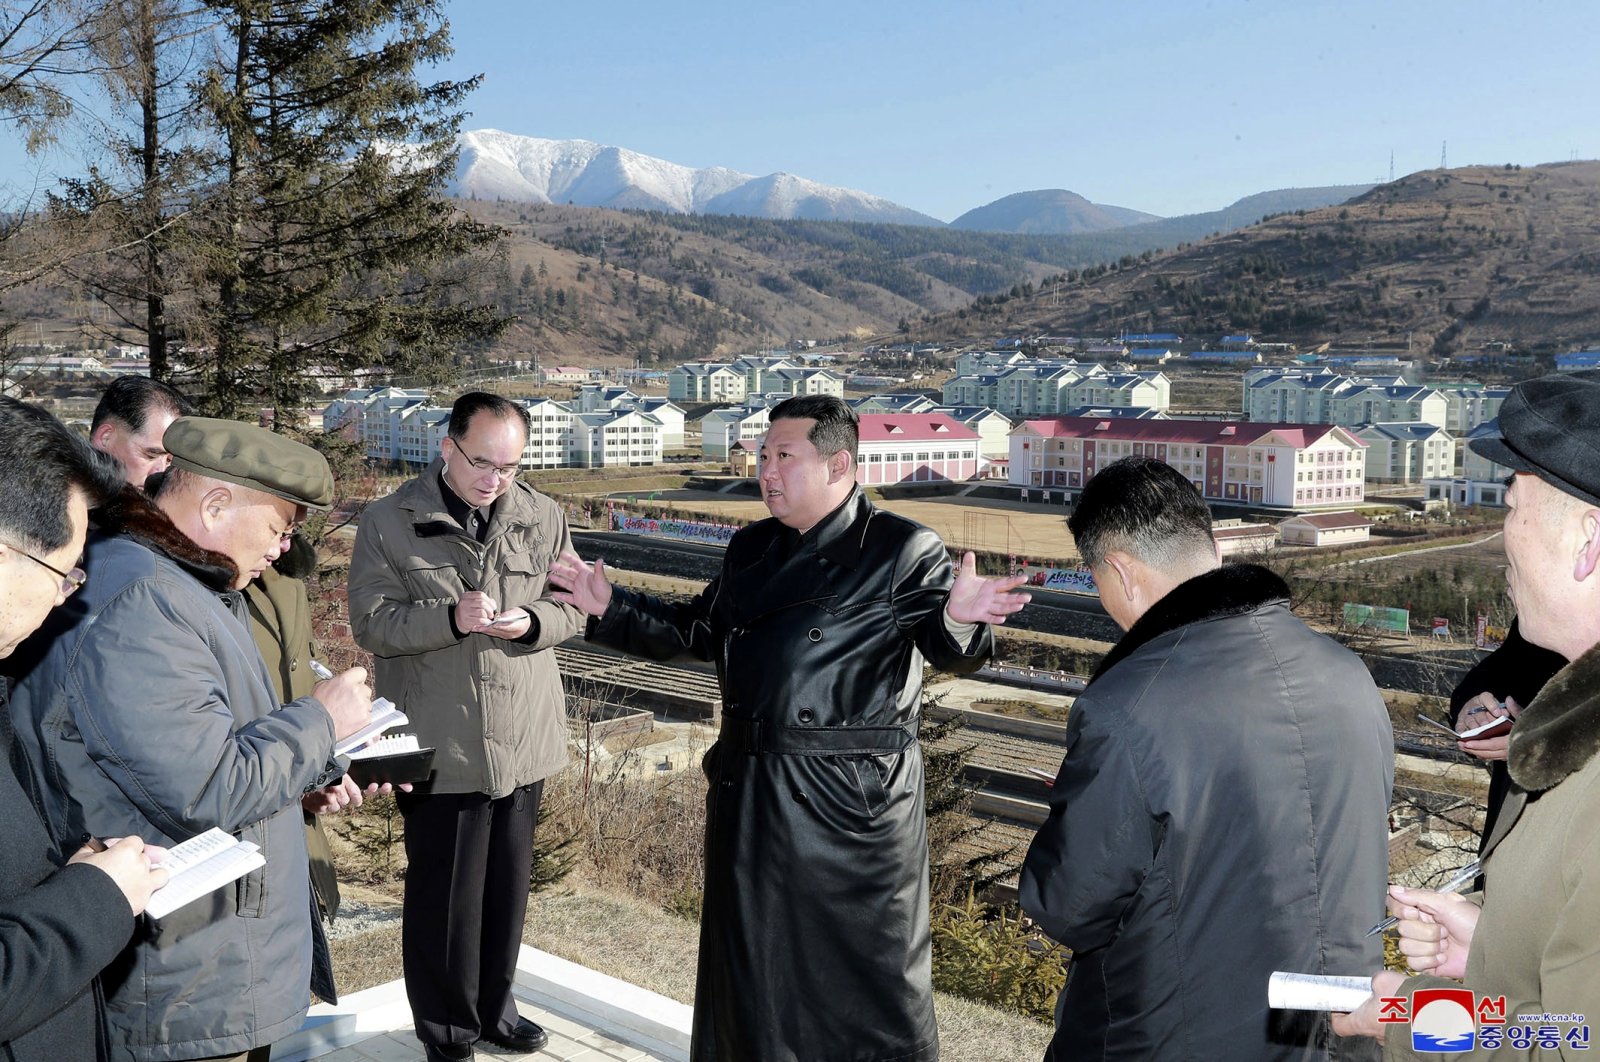 North Korean leader Kim Jong Un, (C), inspects a major development project site in Samjiyon, Ryanggang province, North Korea in this undated photo provided on Nov. 16, 2021, by the North Korean government. (Korean Central News Agency/Korea News Service via AP)